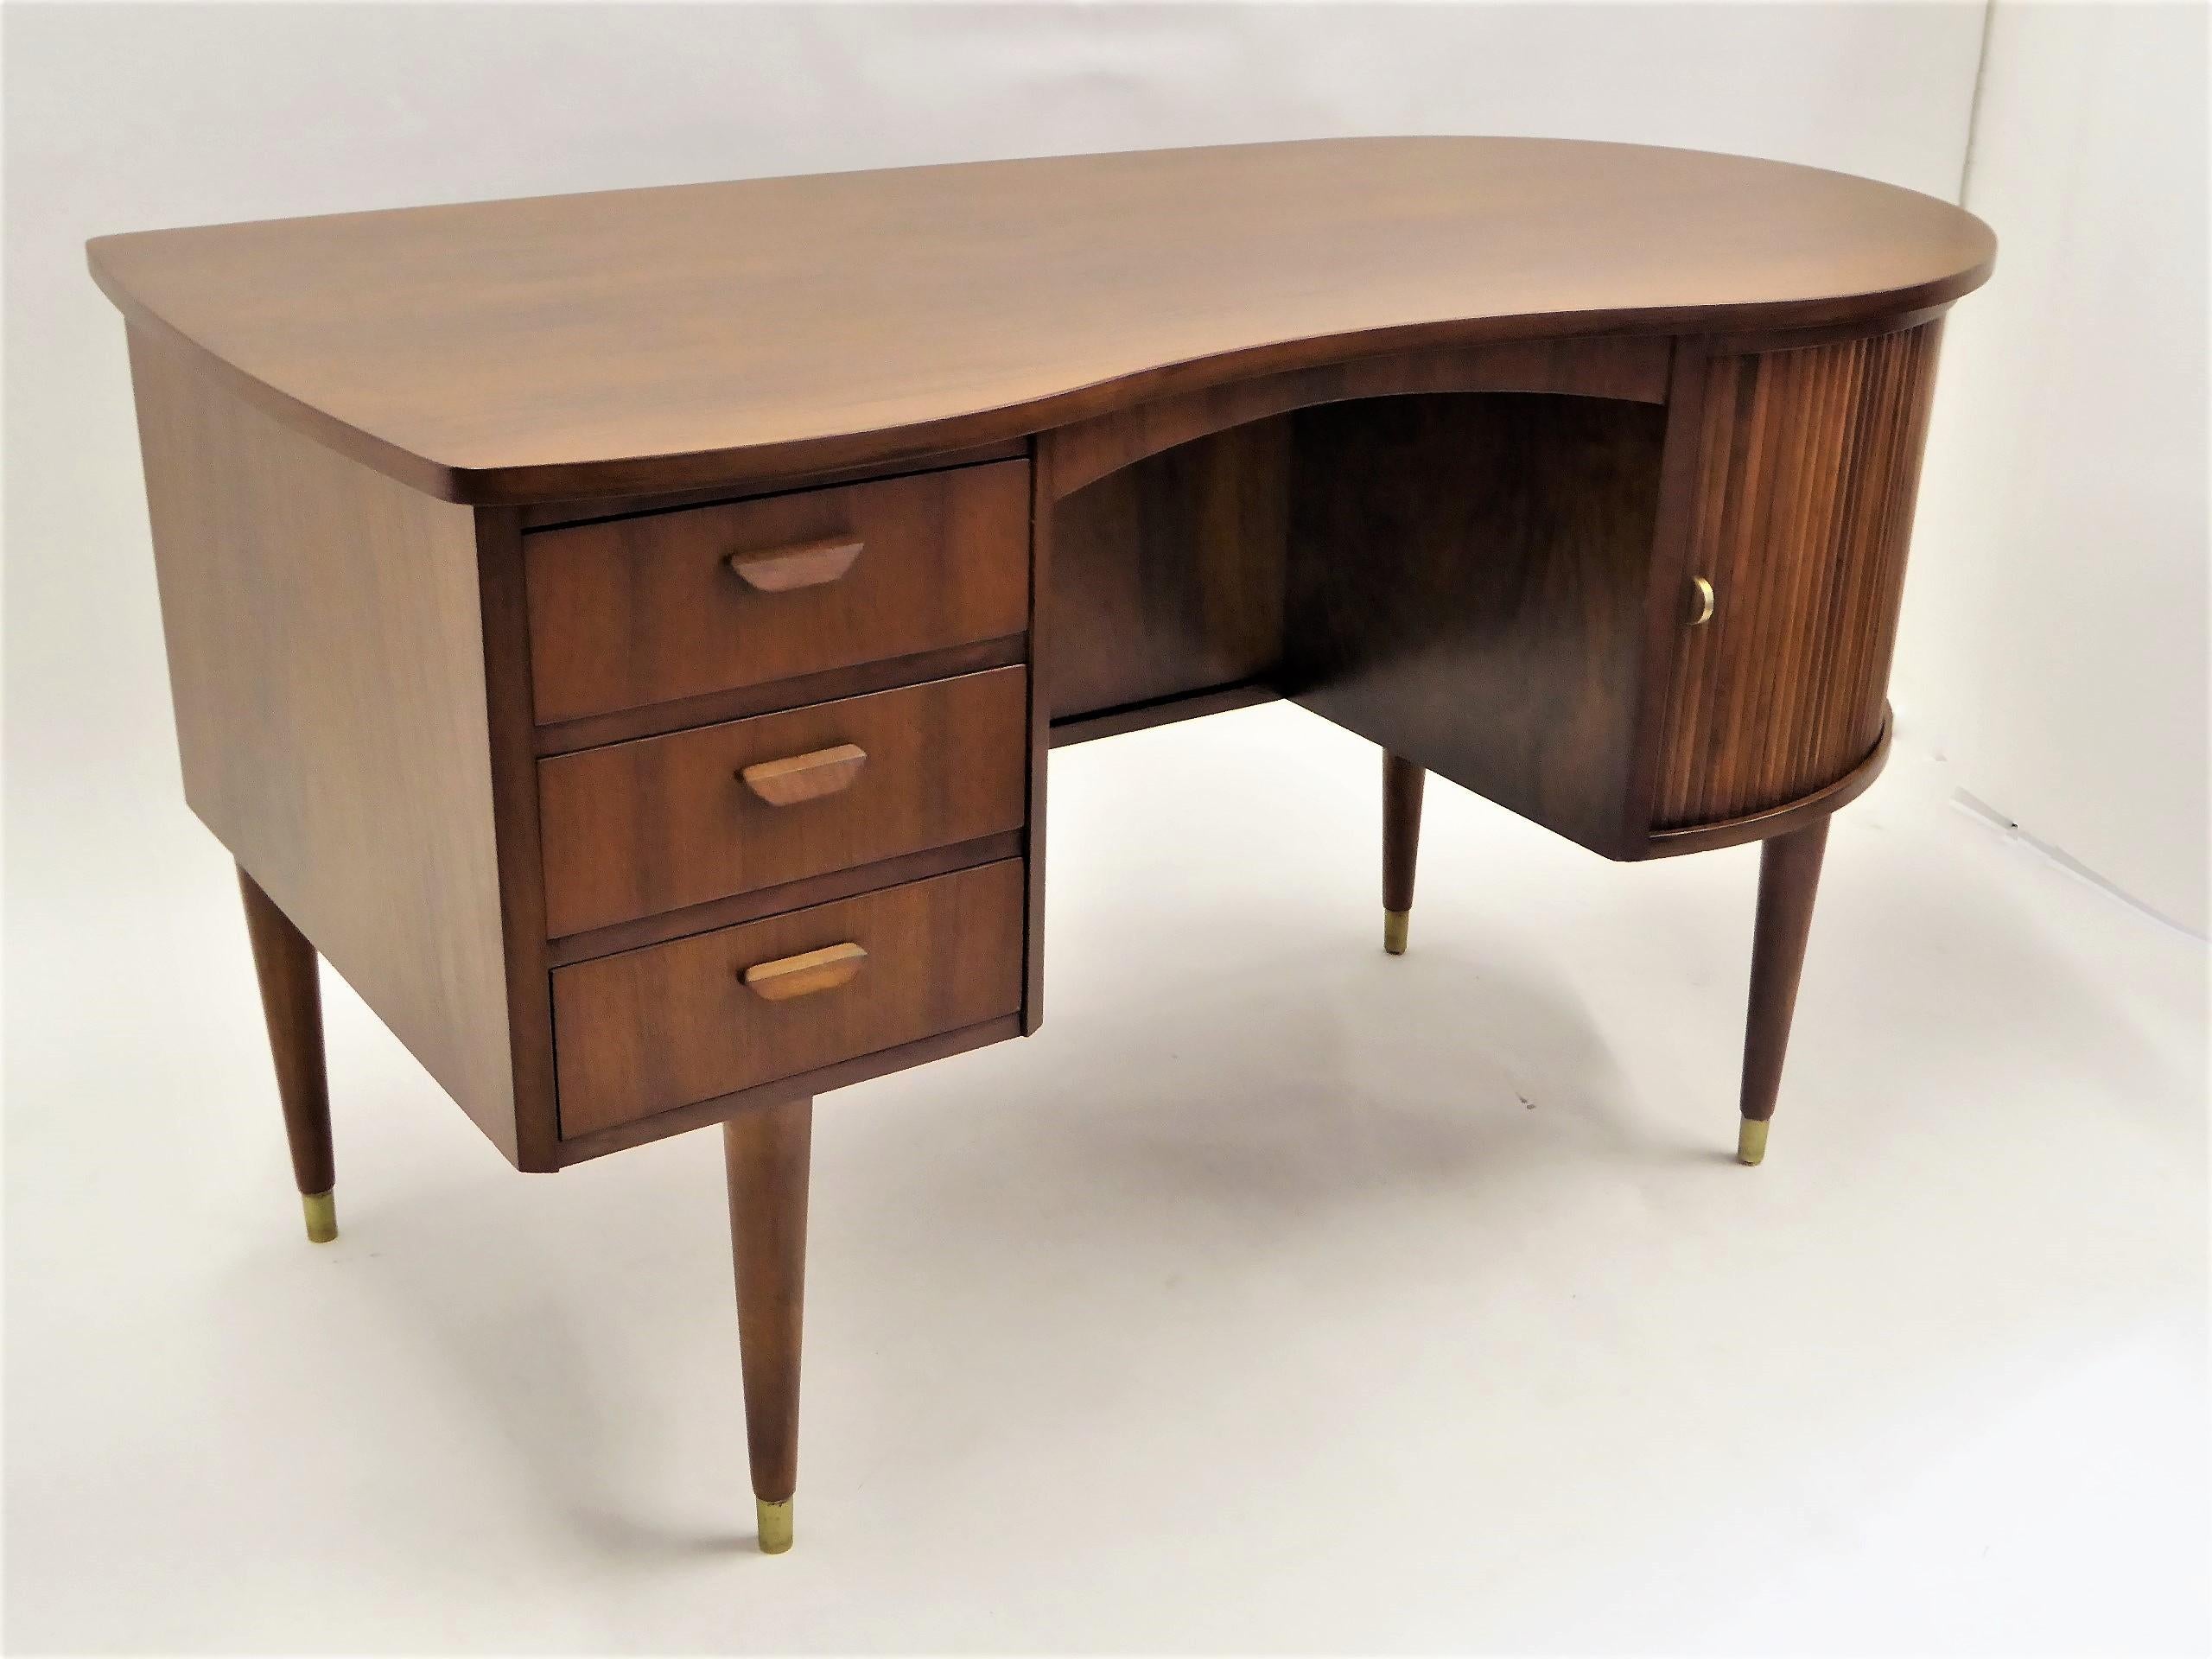 From Denmark, this rarely seen biomorphic double sided teak desk was designed by Gunnar Nielsen Tibergaard. It dates from 1954 and features three drawers on the left with wood pulls. The curved side has two tambour doors that slide and open to